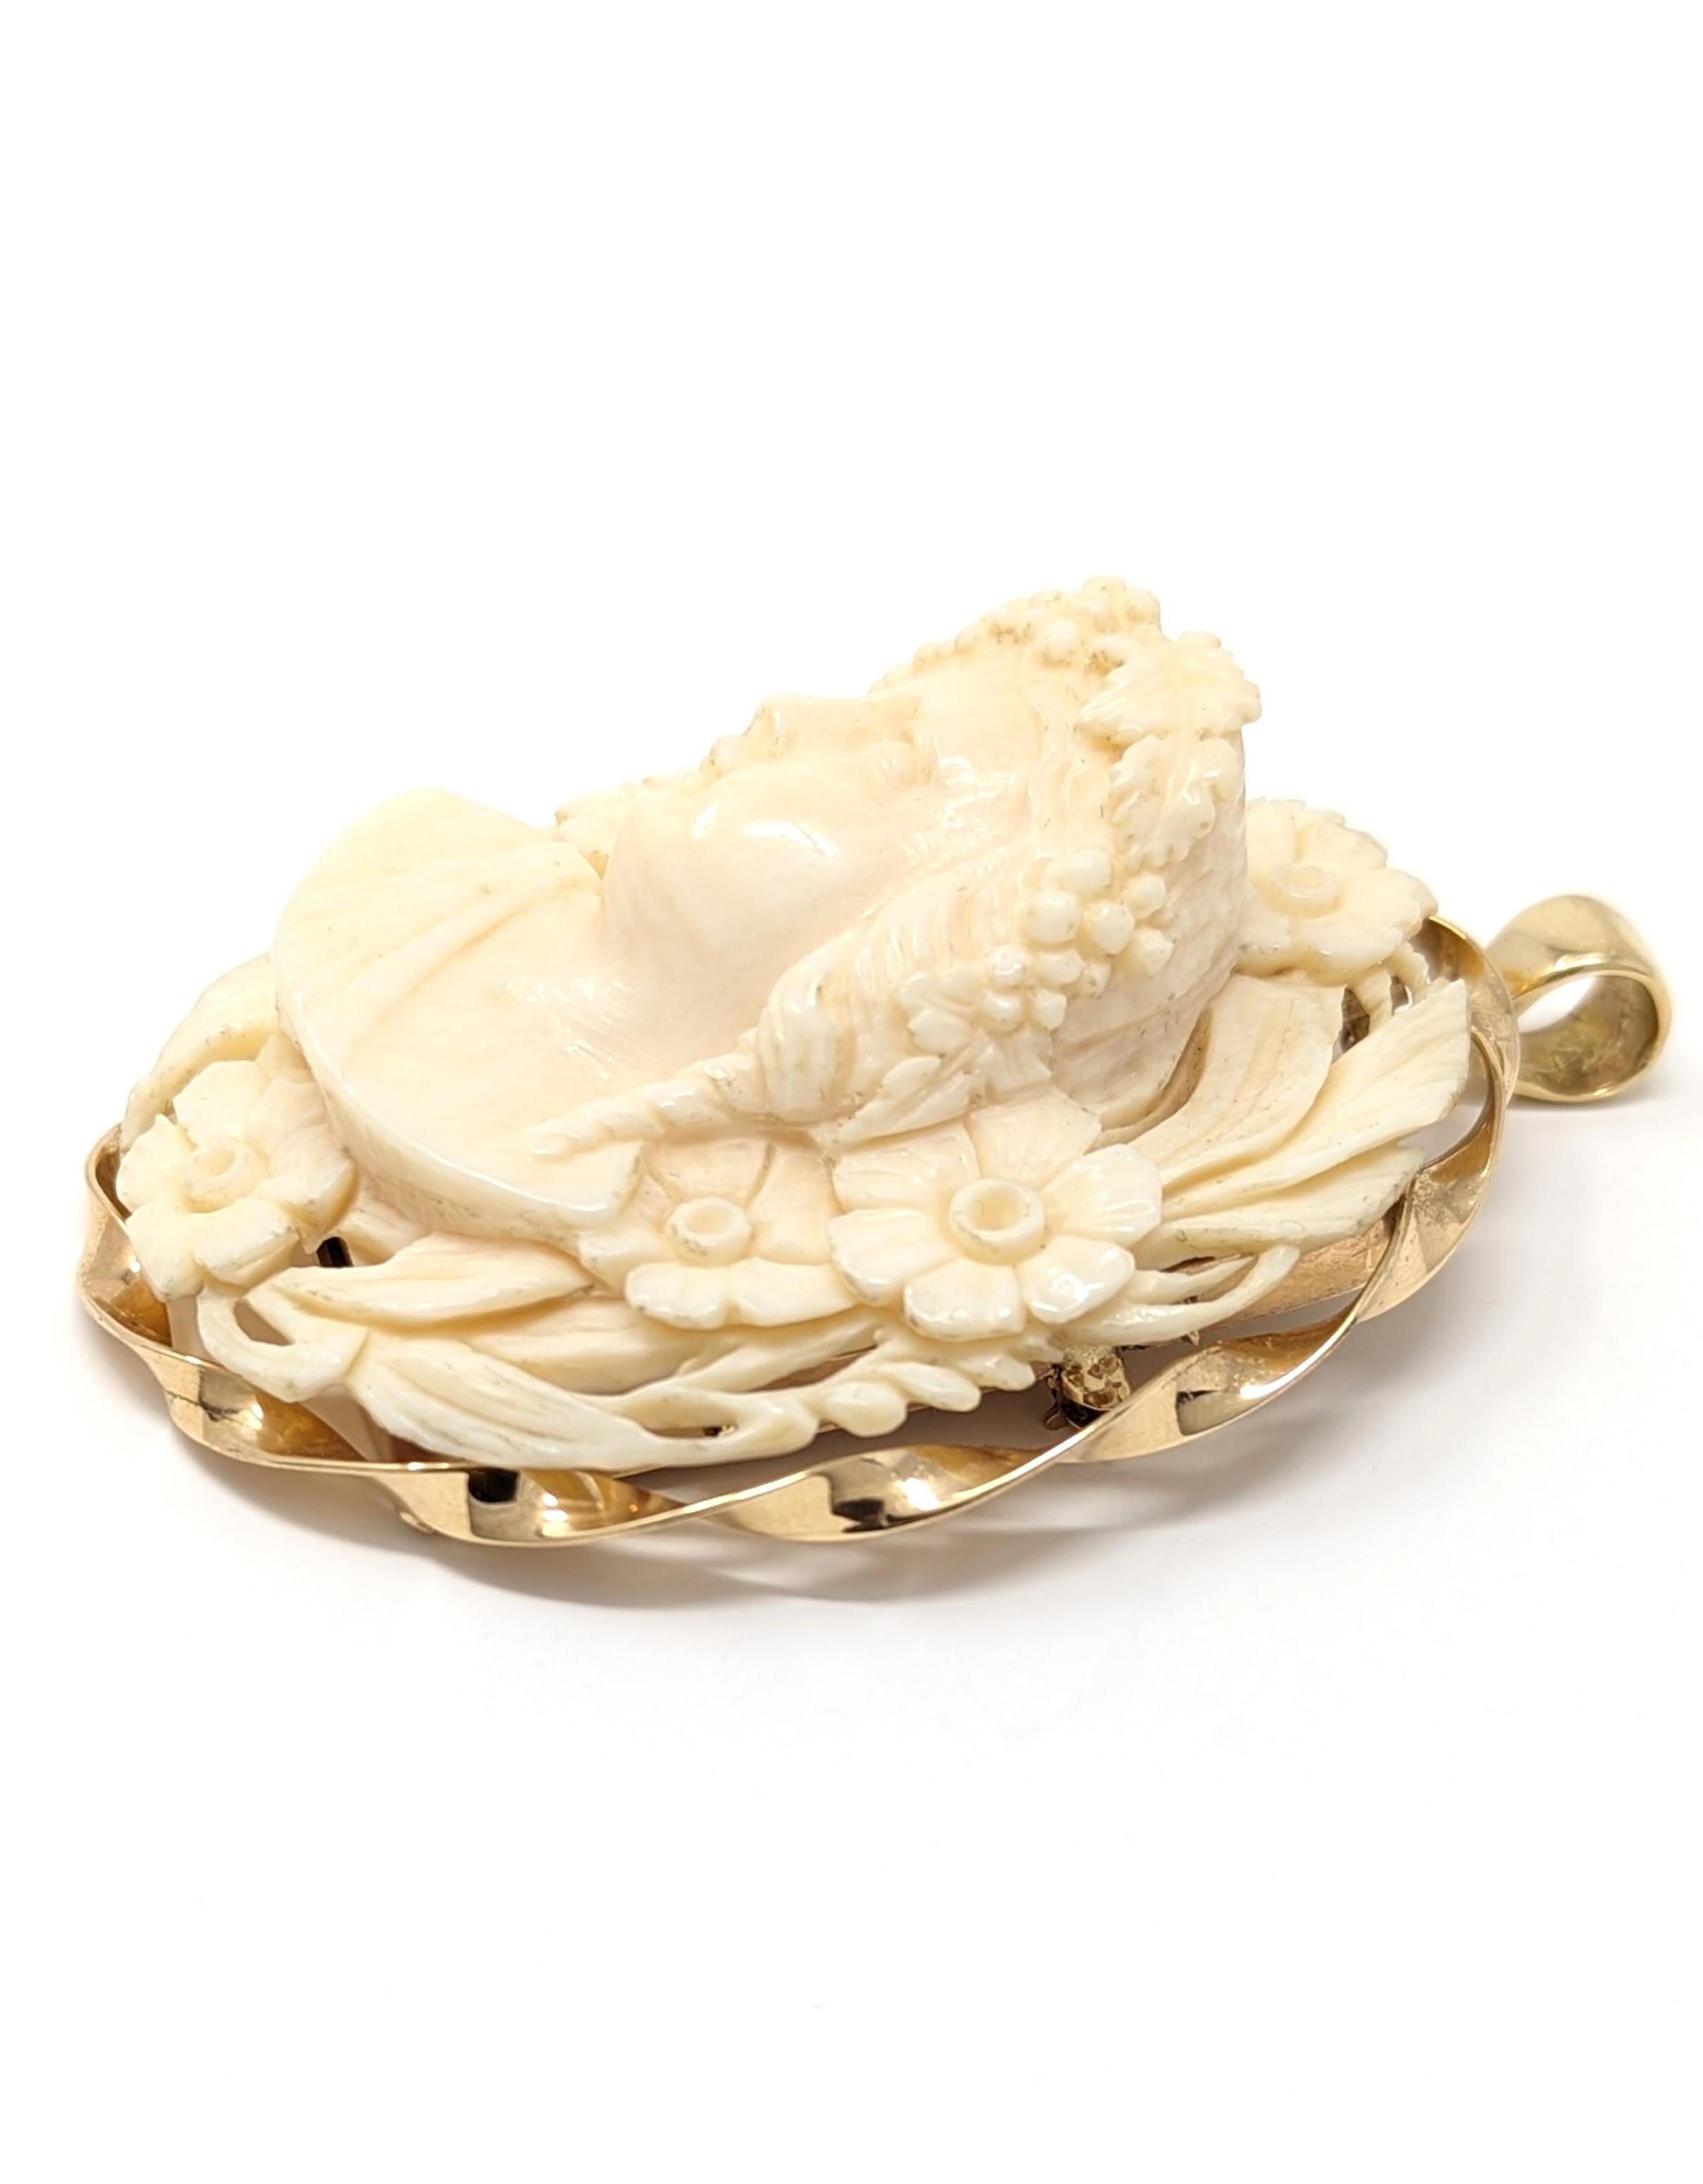 Antique 14k Hand Carved Bone Cameo Pendant Brooch High Relief Solid Yellow Gold For Sale 1